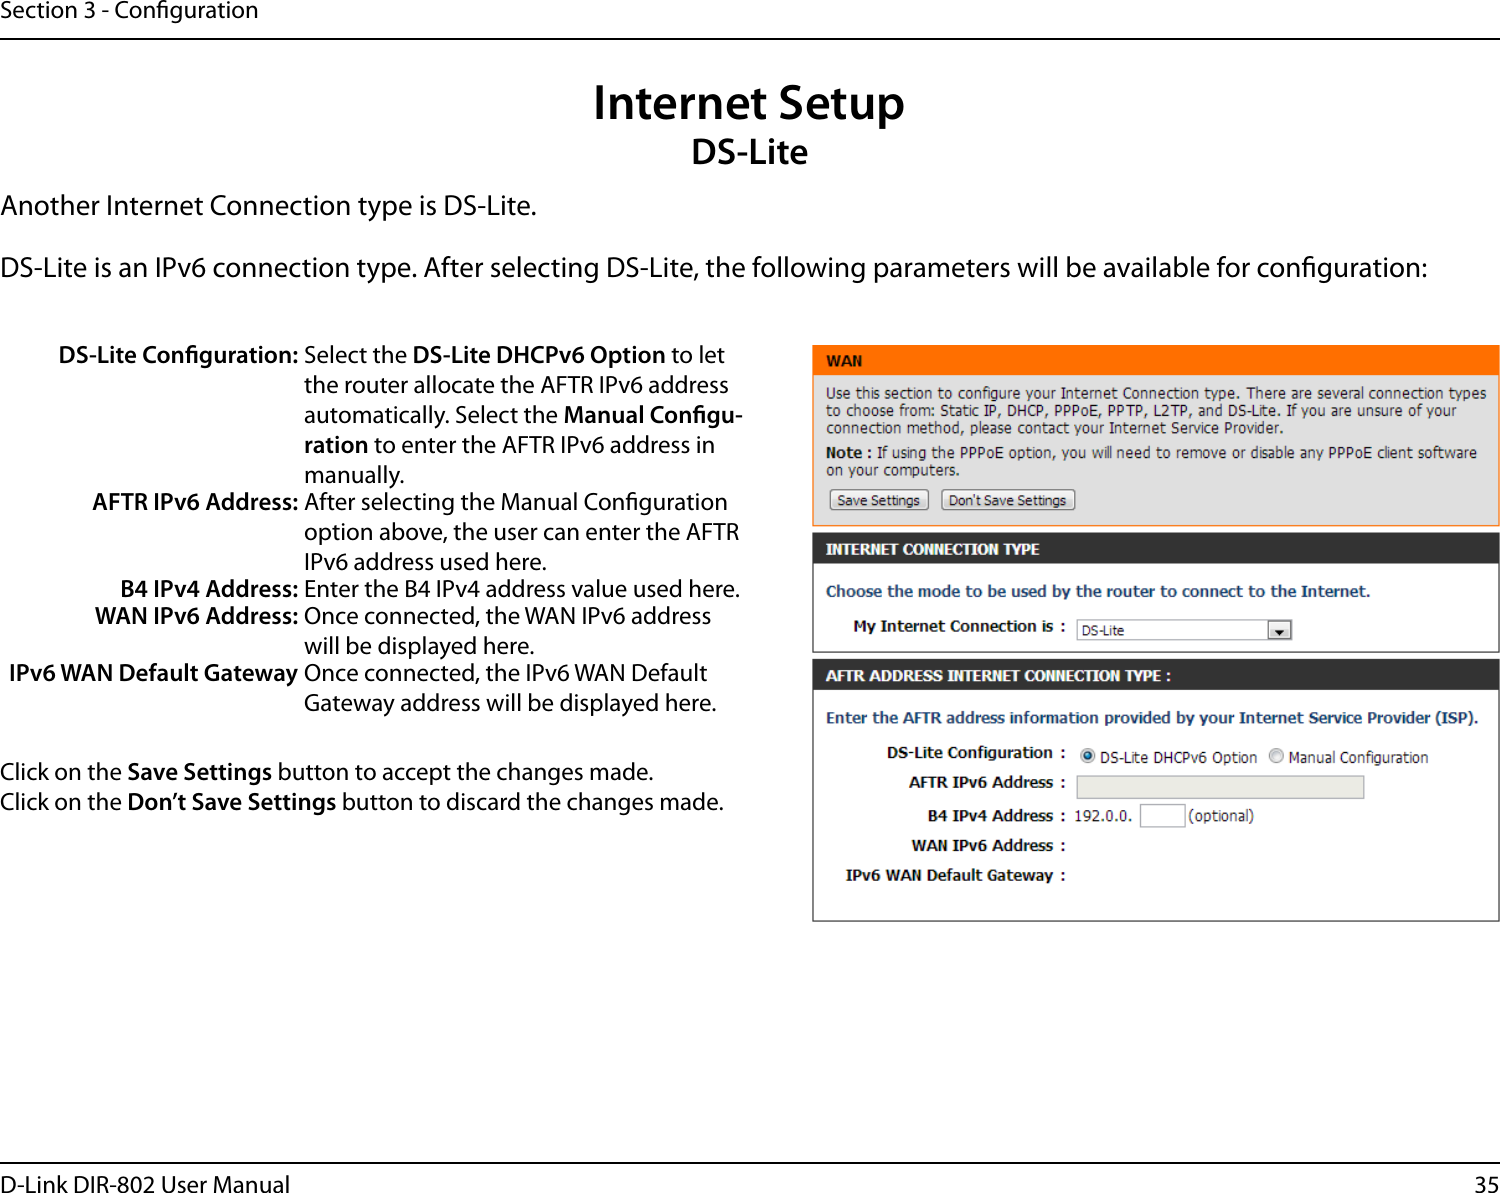 35D-Link DIR-802 User ManualSection 3 - CongurationInternet SetupDS-LiteAnother Internet Connection type is DS-Lite.DS-Lite is an IPv6 connection type. After selecting DS-Lite, the following parameters will be available for conguration:DS-Lite Conguration: Select the DS-Lite DHCPv6 Option to let the router allocate the AFTR IPv6 address automatically. Select the Manual Congu-ration to enter the AFTR IPv6 address in manually.AFTR IPv6 Address: After selecting the Manual Conguration option above, the user can enter the AFTR IPv6 address used here.B4 IPv4 Address: Enter the B4 IPv4 address value used here.WAN IPv6 Address: Once connected, the WAN IPv6 address will be displayed here.IPv6 WAN Default Gateway Once connected, the IPv6 WAN Default Gateway address will be displayed here.Click on the Save Settings button to accept the changes made.Click on the Don’t Save Settings button to discard the changes made.